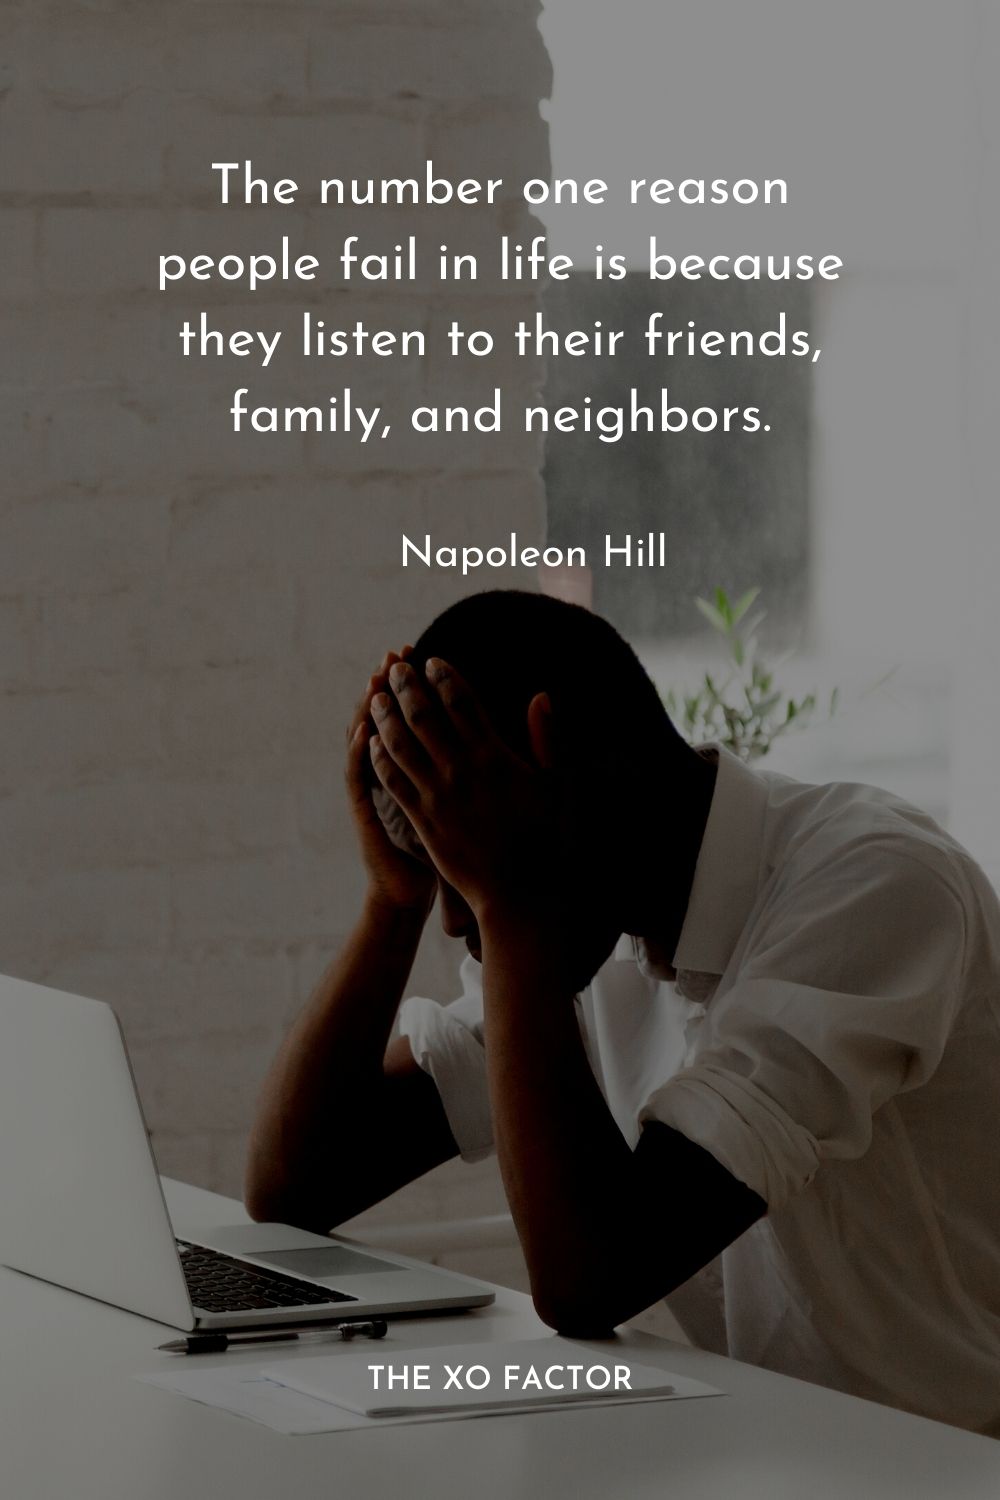 The number one reason people fail in life is because they listen to their friends, family, and neighbors.